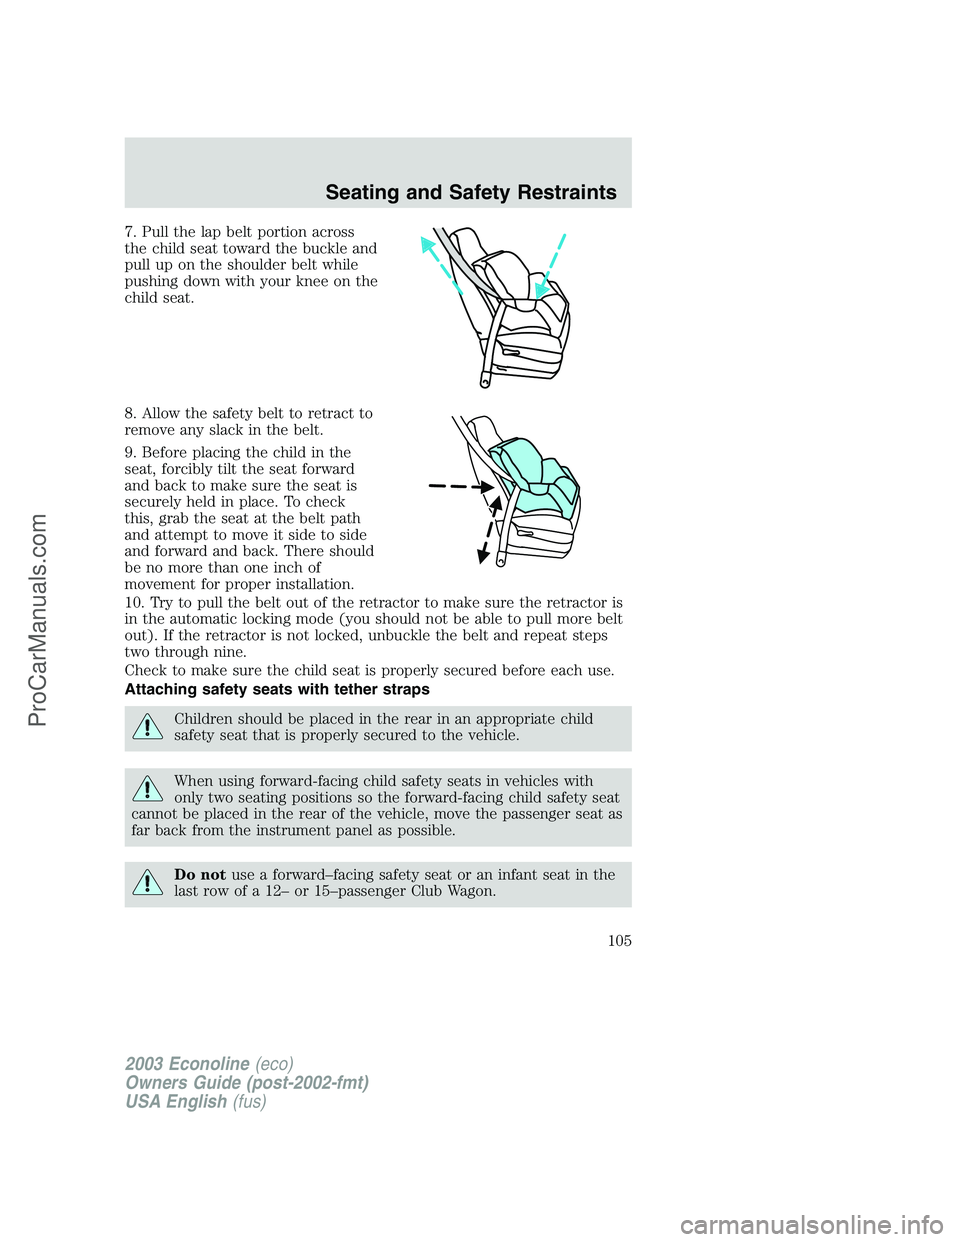 FORD E-450 2003  Owners Manual 7. Pull the lap belt portion across
the child seat toward the buckle and
pull up on the shoulder belt while
pushing down with your knee on the
child seat.
8. Allow the safety belt to retract to
remove